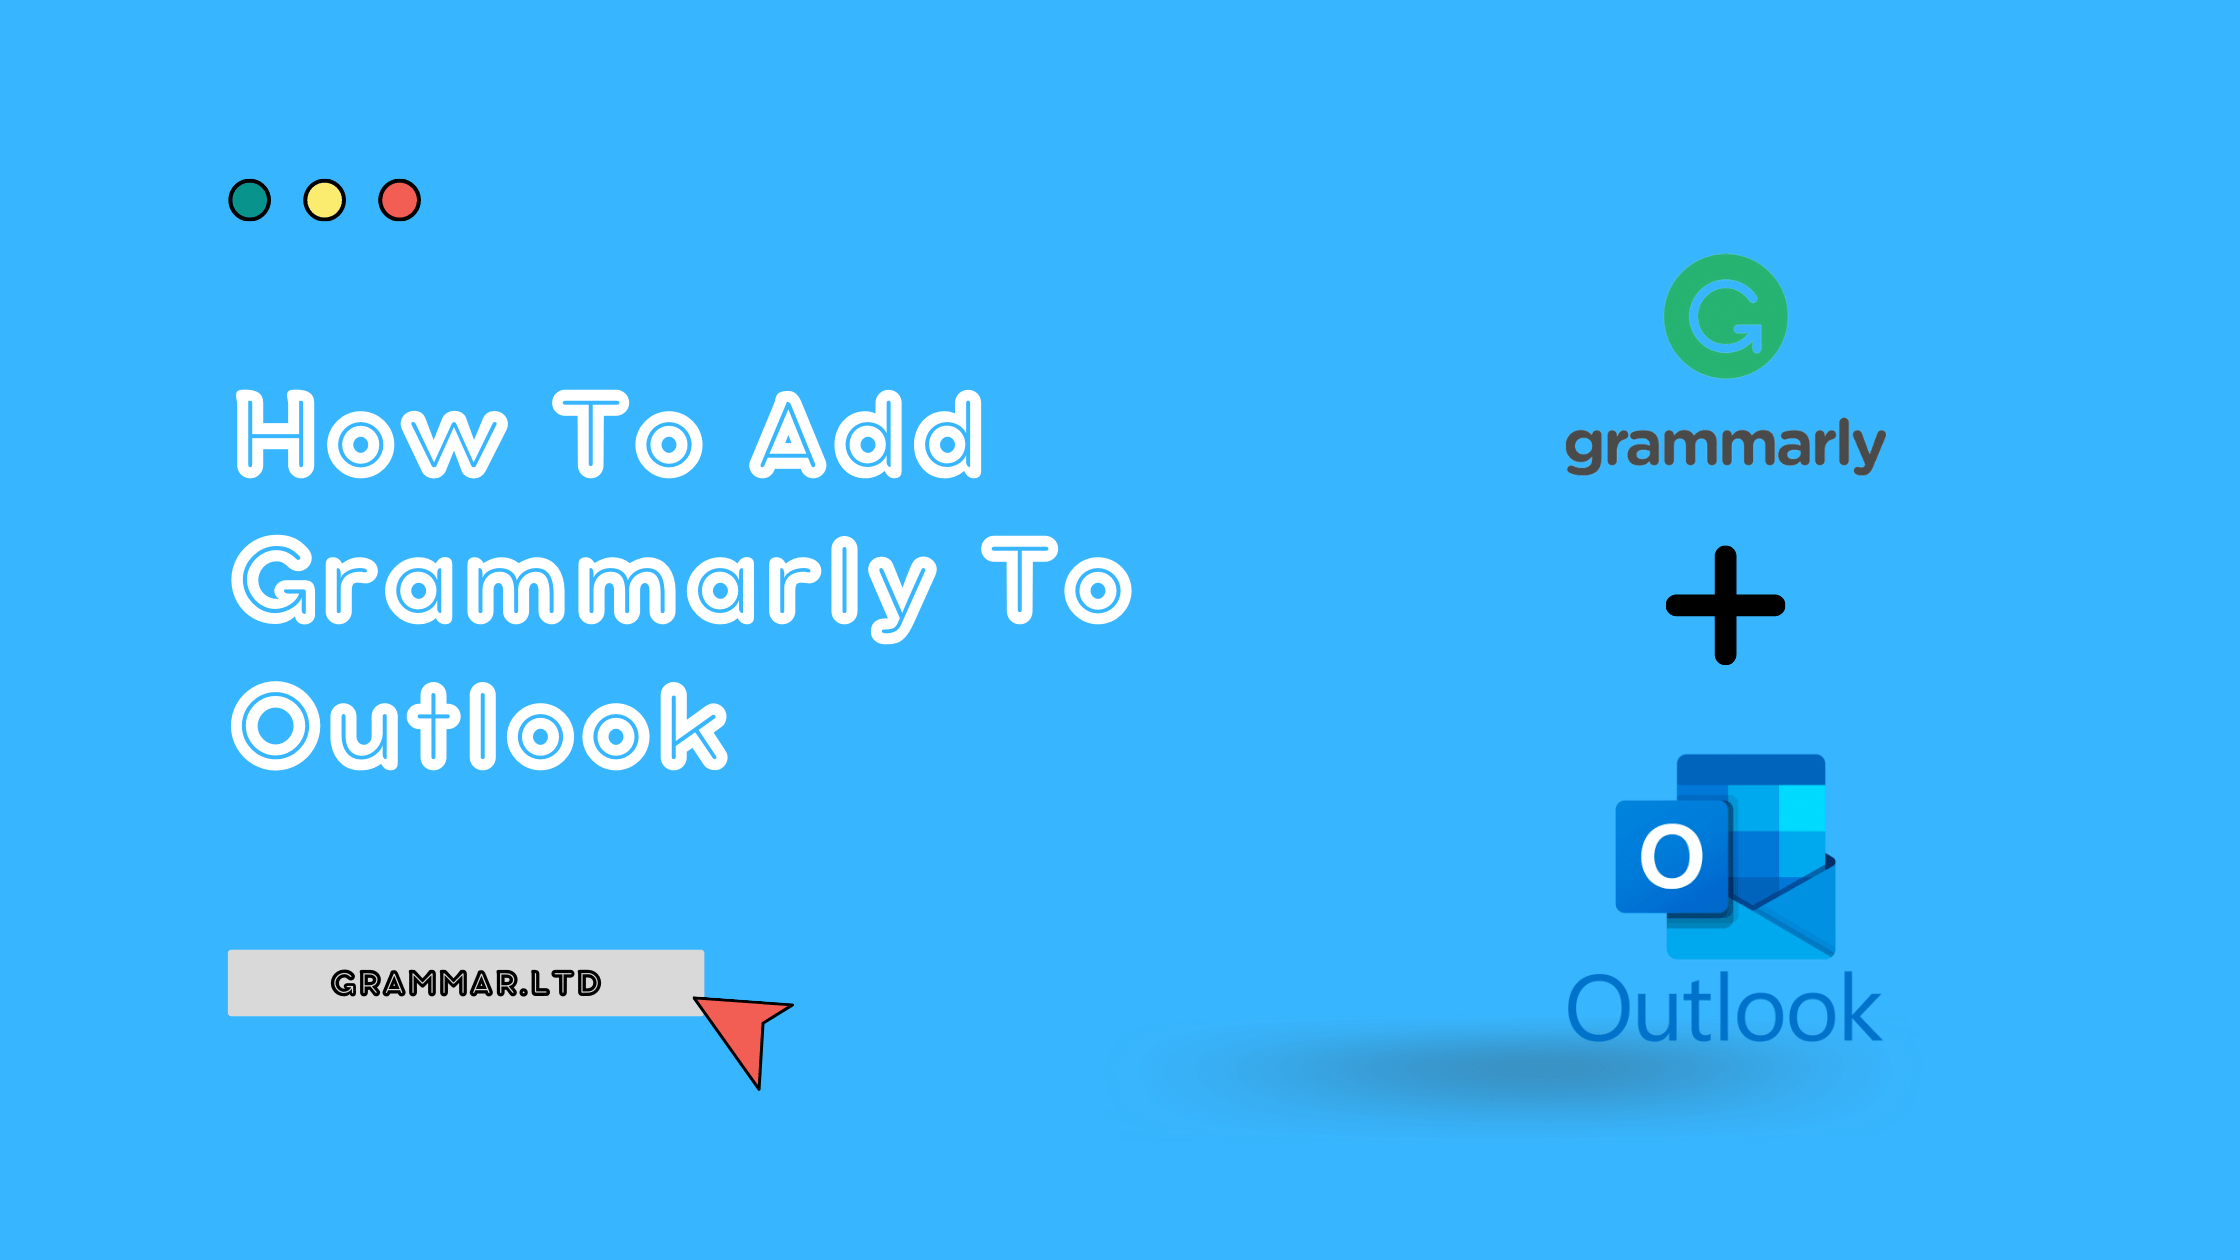 download grammarly free full version for outlook